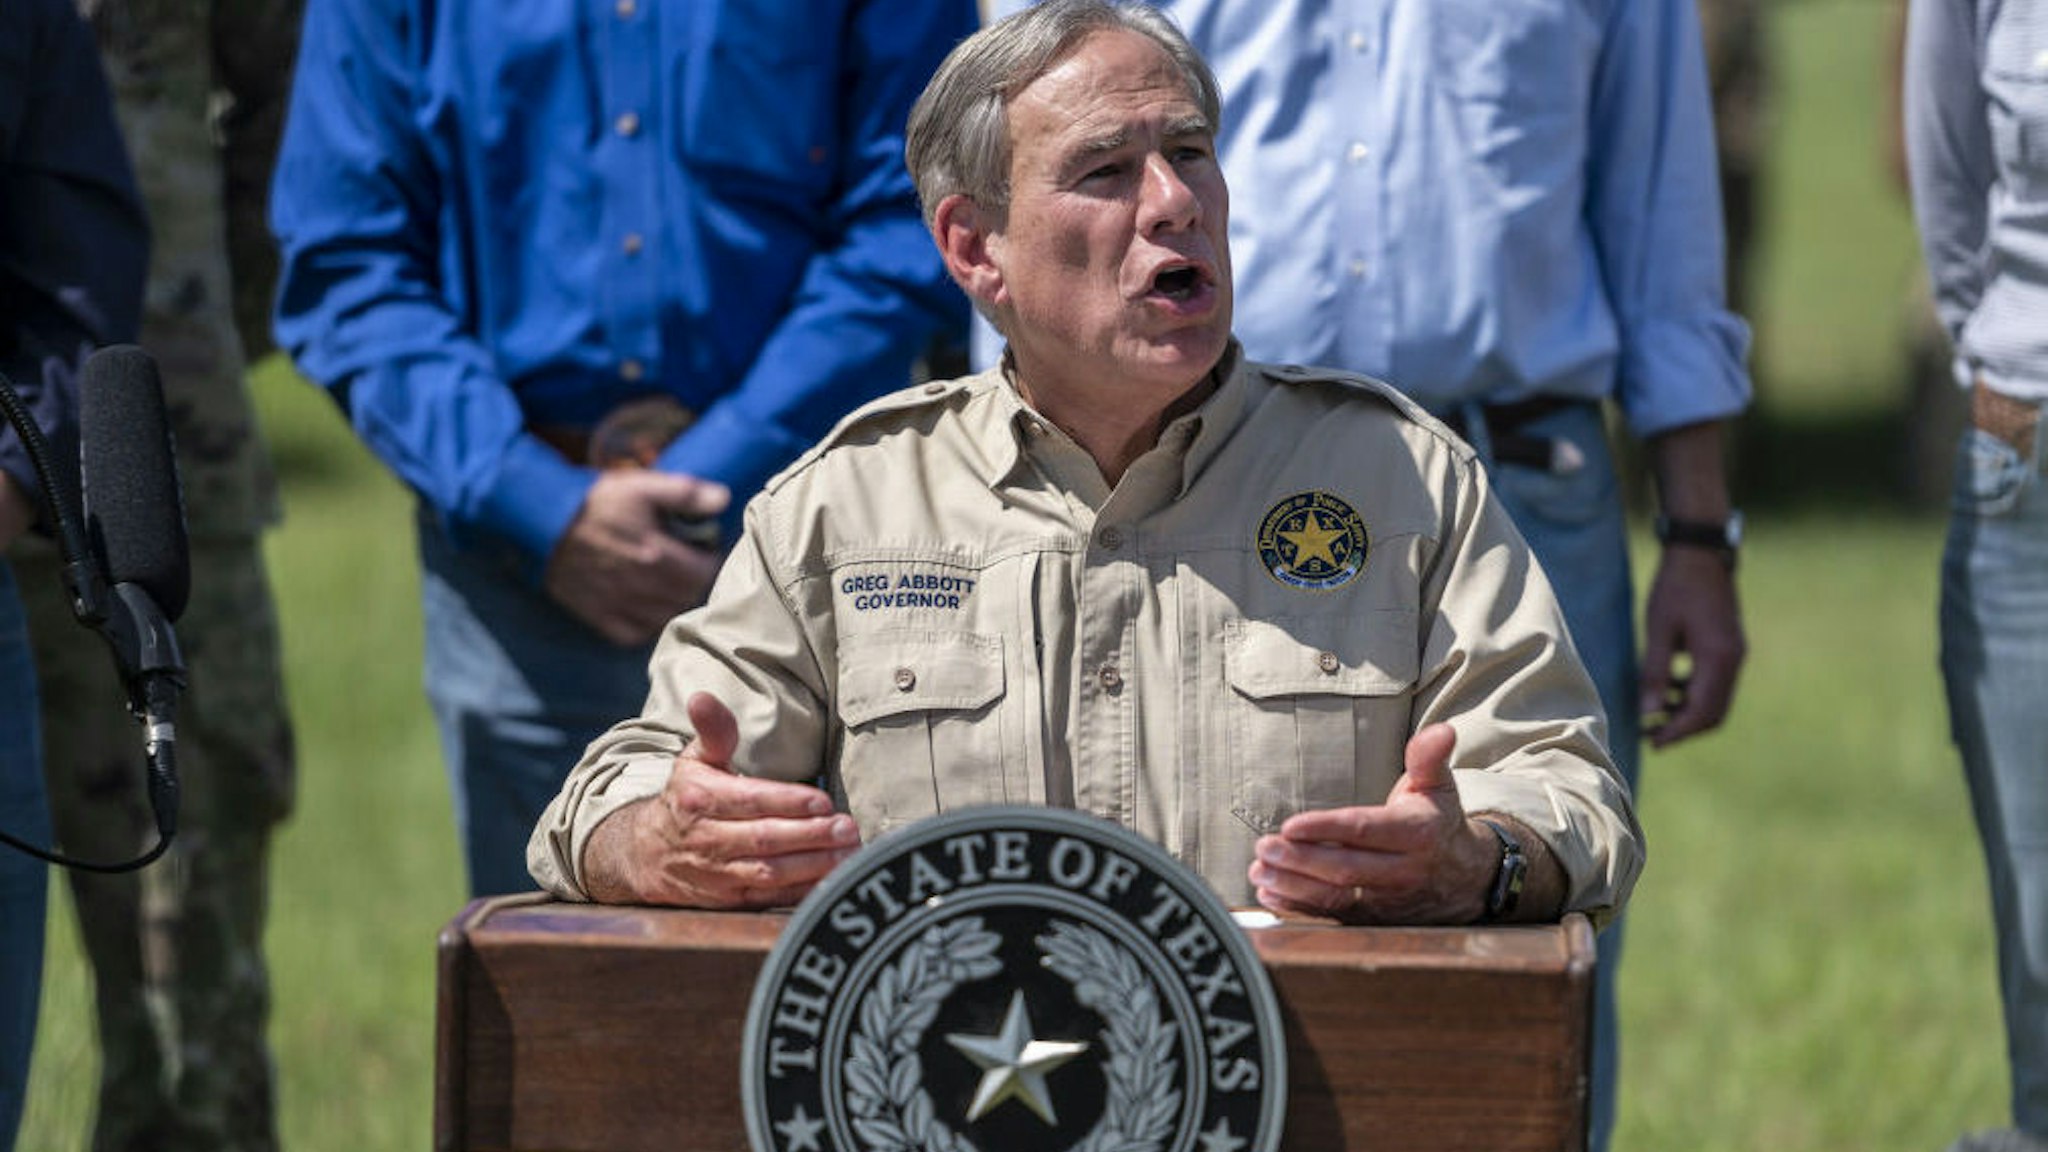 Greg Abbott, governor of Texas, speaks during a news conference in Mission, Texas, U.S., on Wednesday, Oct. 6, 2021.